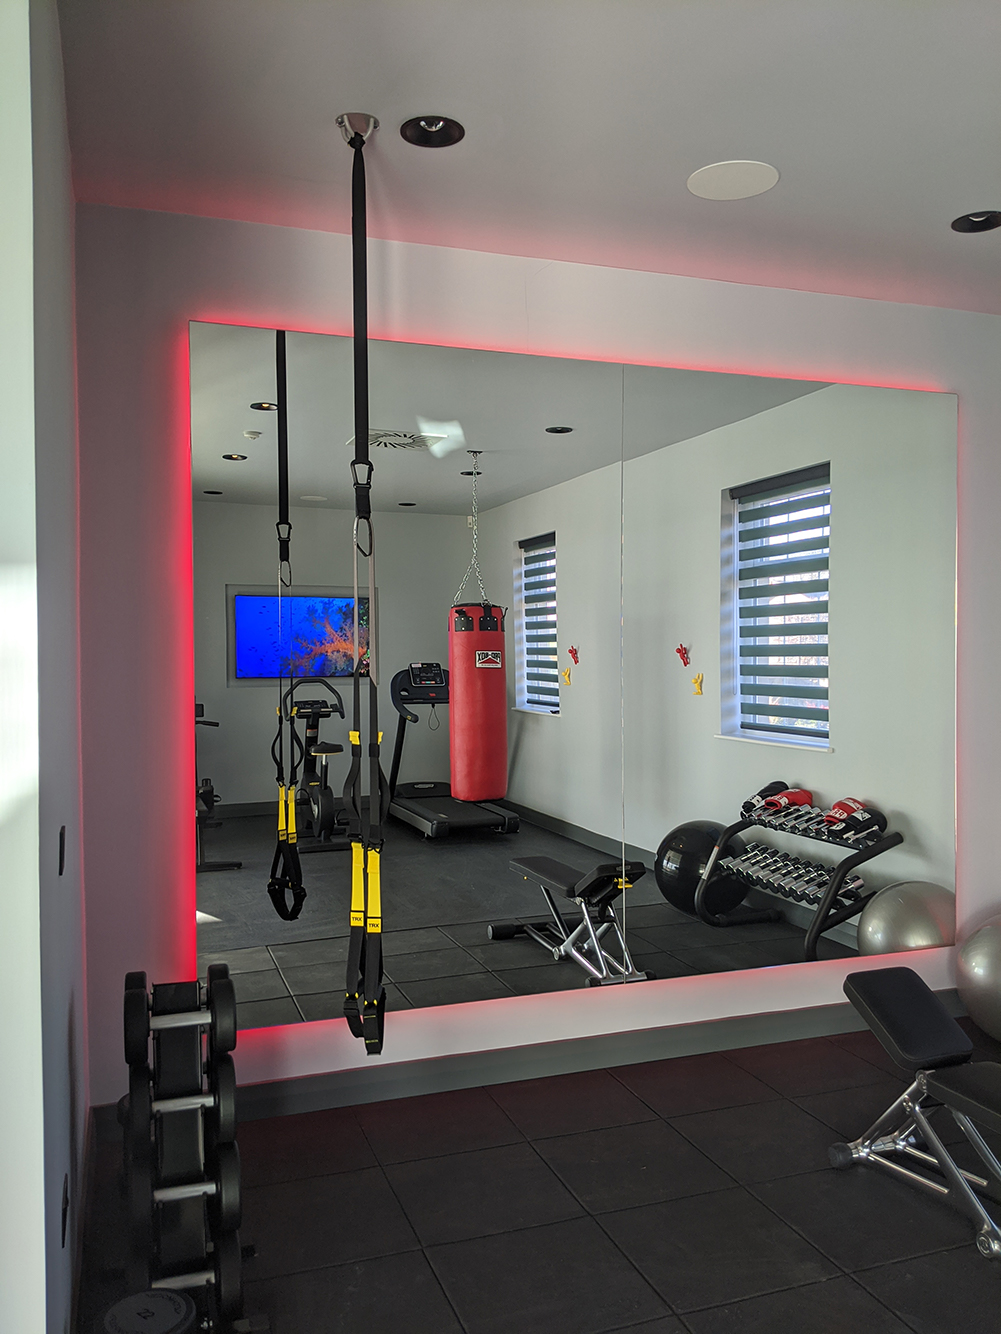 A photo of the finished gym with red LED lighting around the mirror.